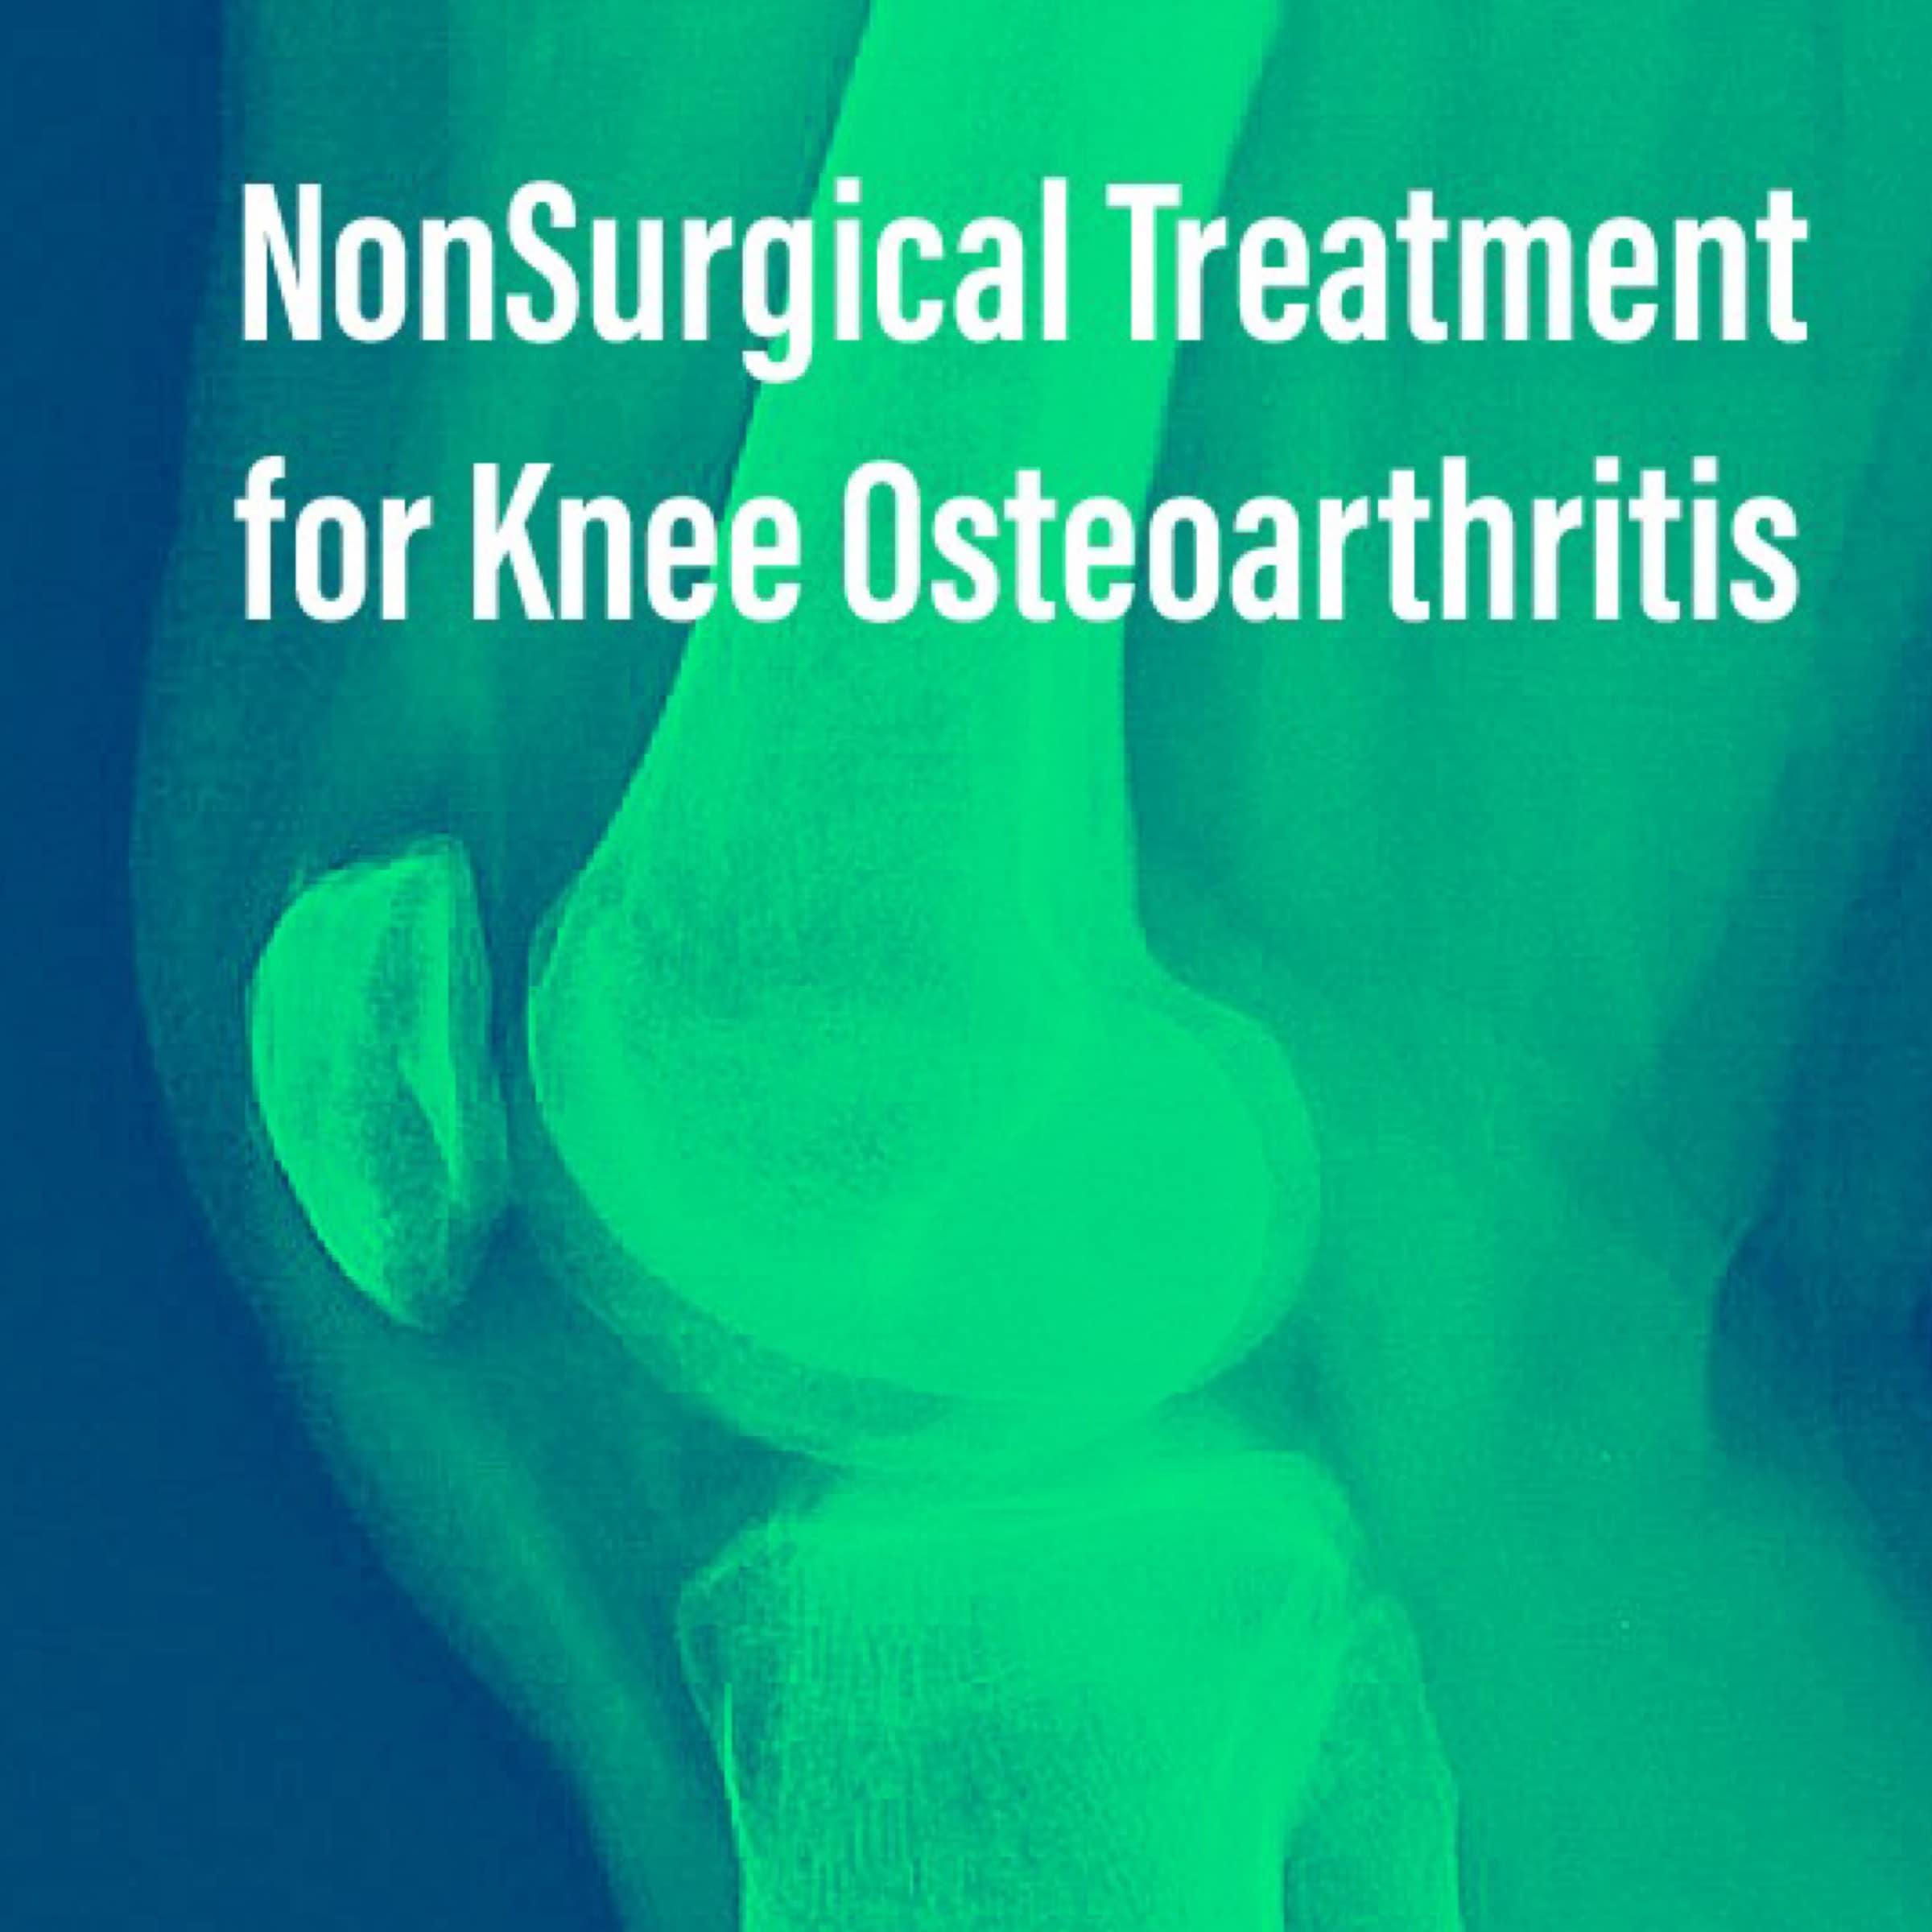 Non Surgical Treatment Options for Knee Osteoarthritis